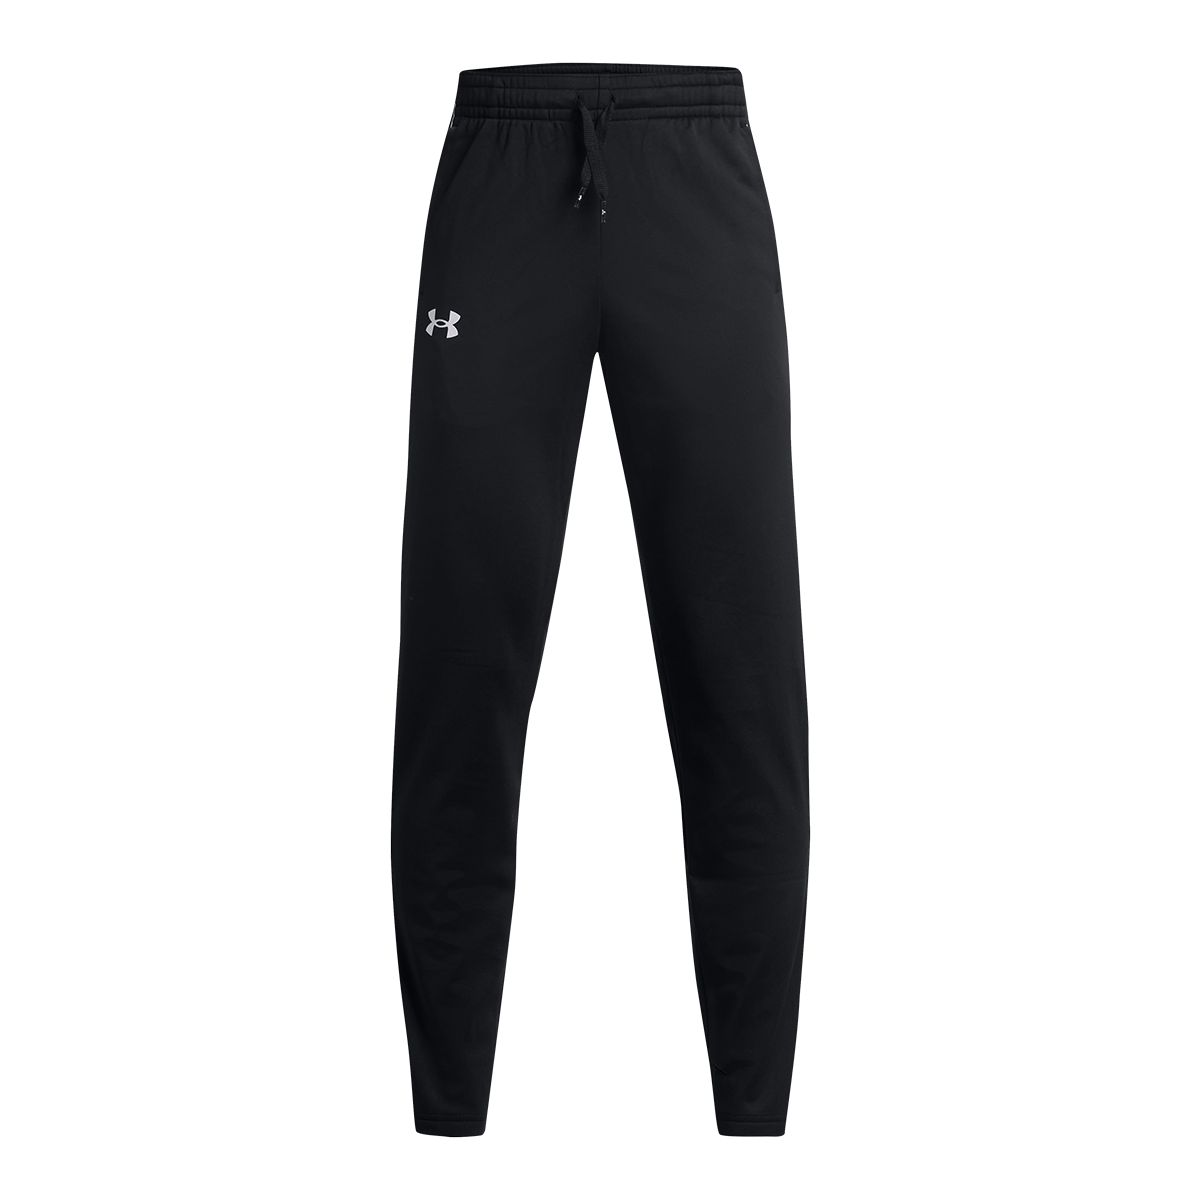 Under Armour Boys' Pennant Sweatpants Kids' Tapered Cuffed Loose Athletic